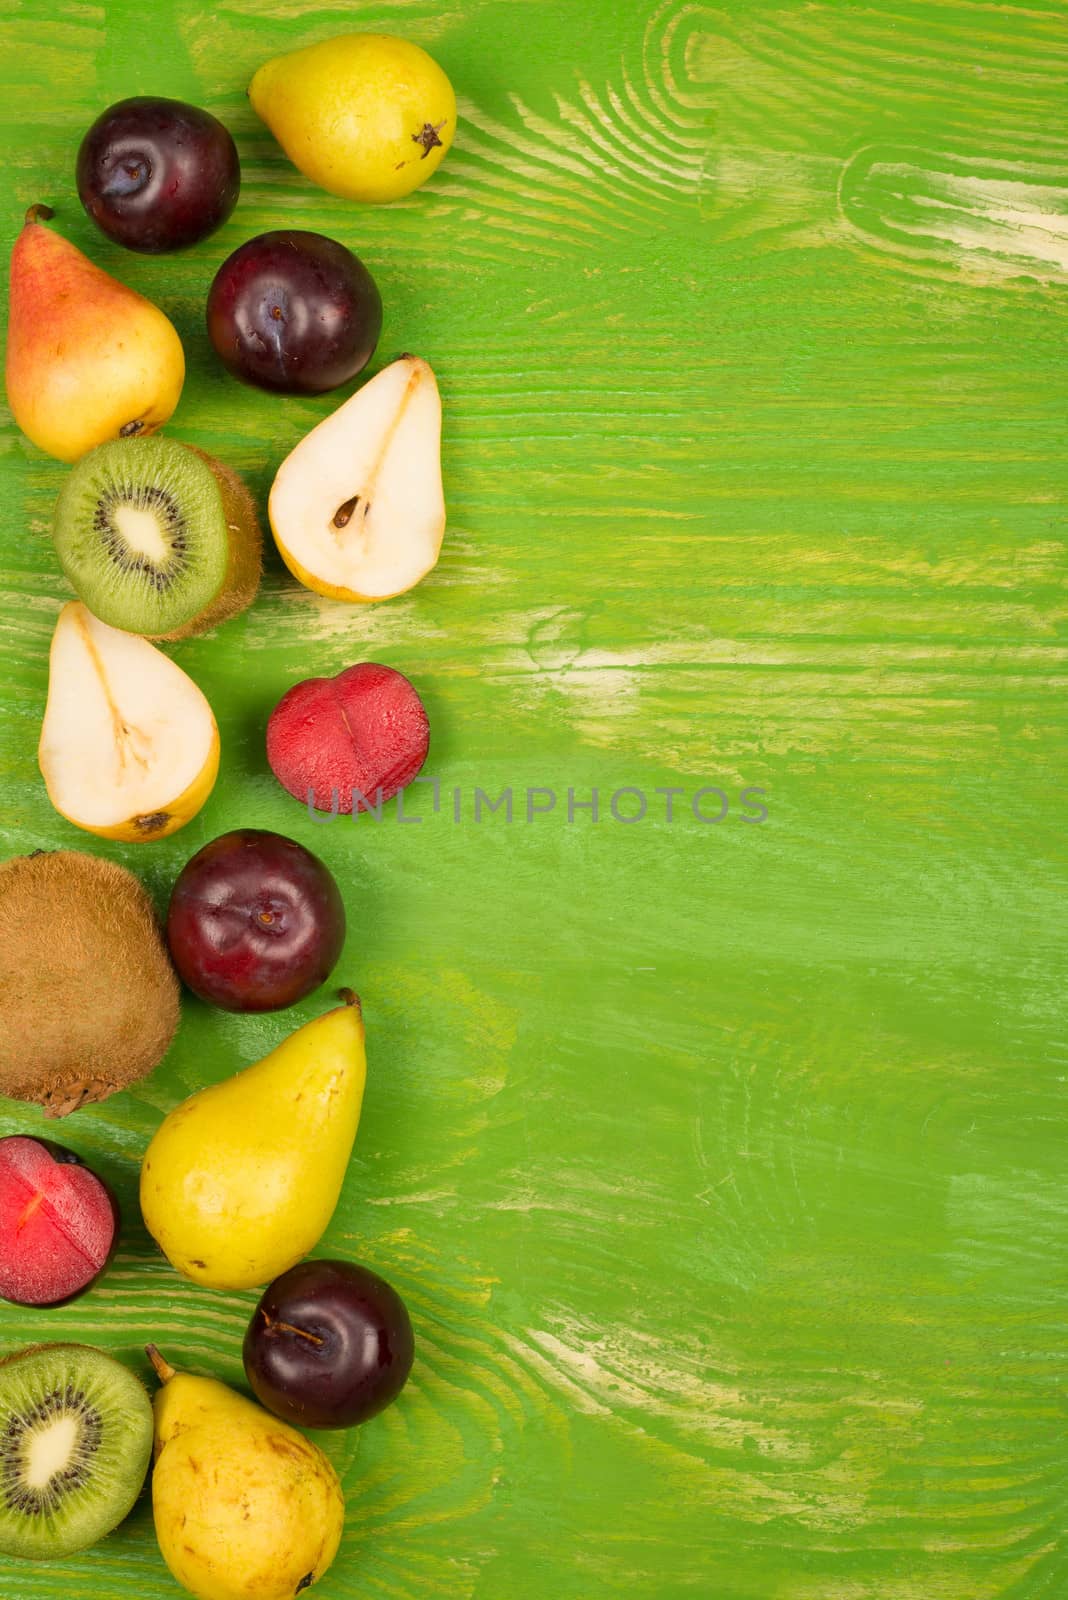 Fresh fruit arranged on a rustic background